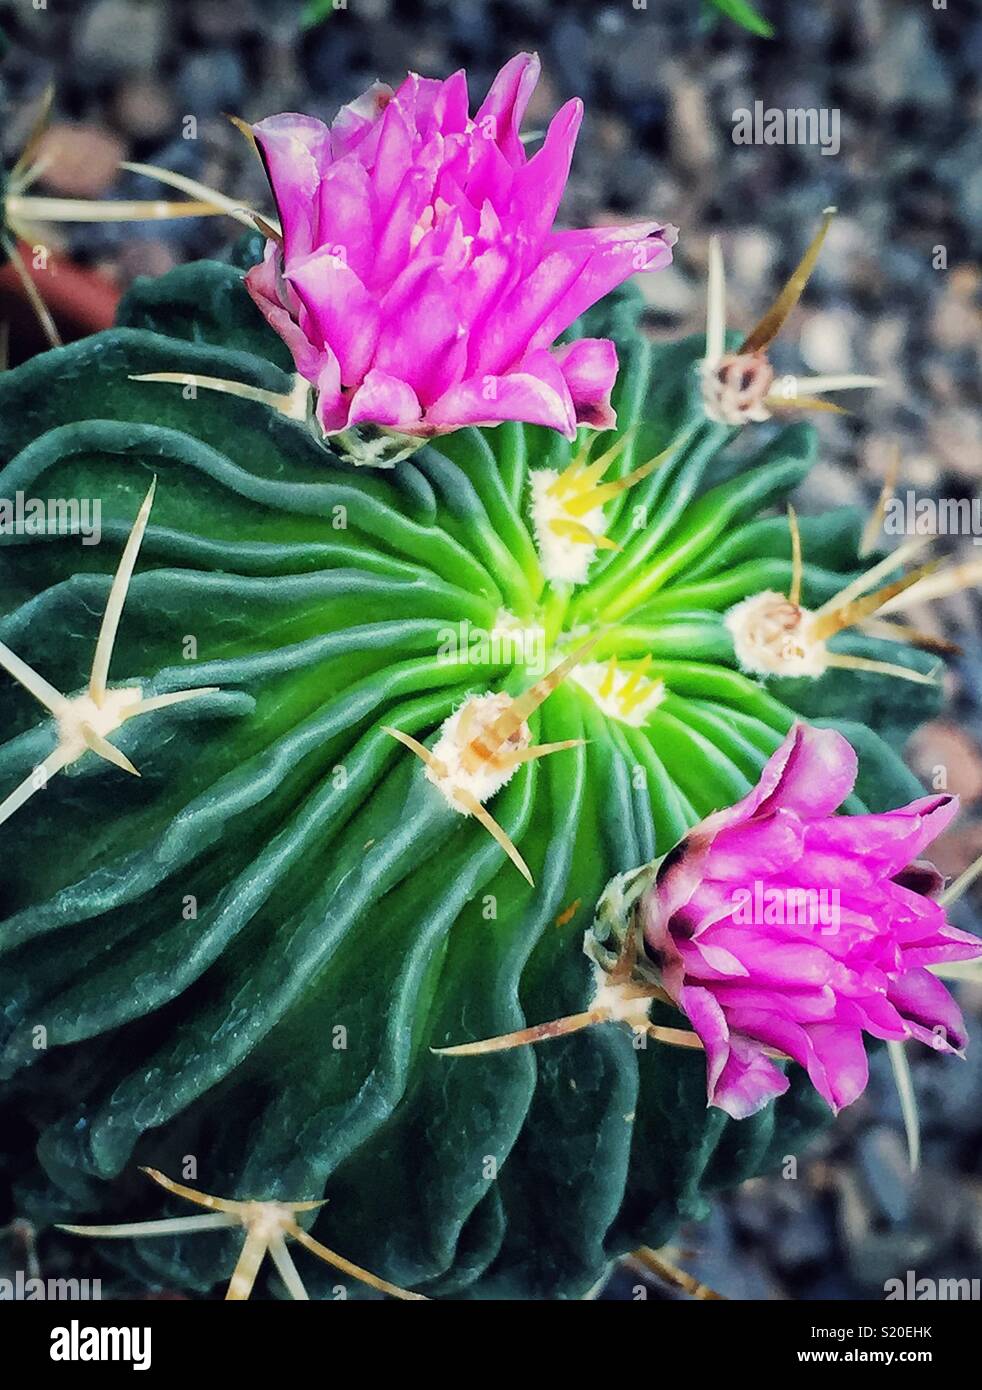 Bright pink flowers on a cactus Stock Photo